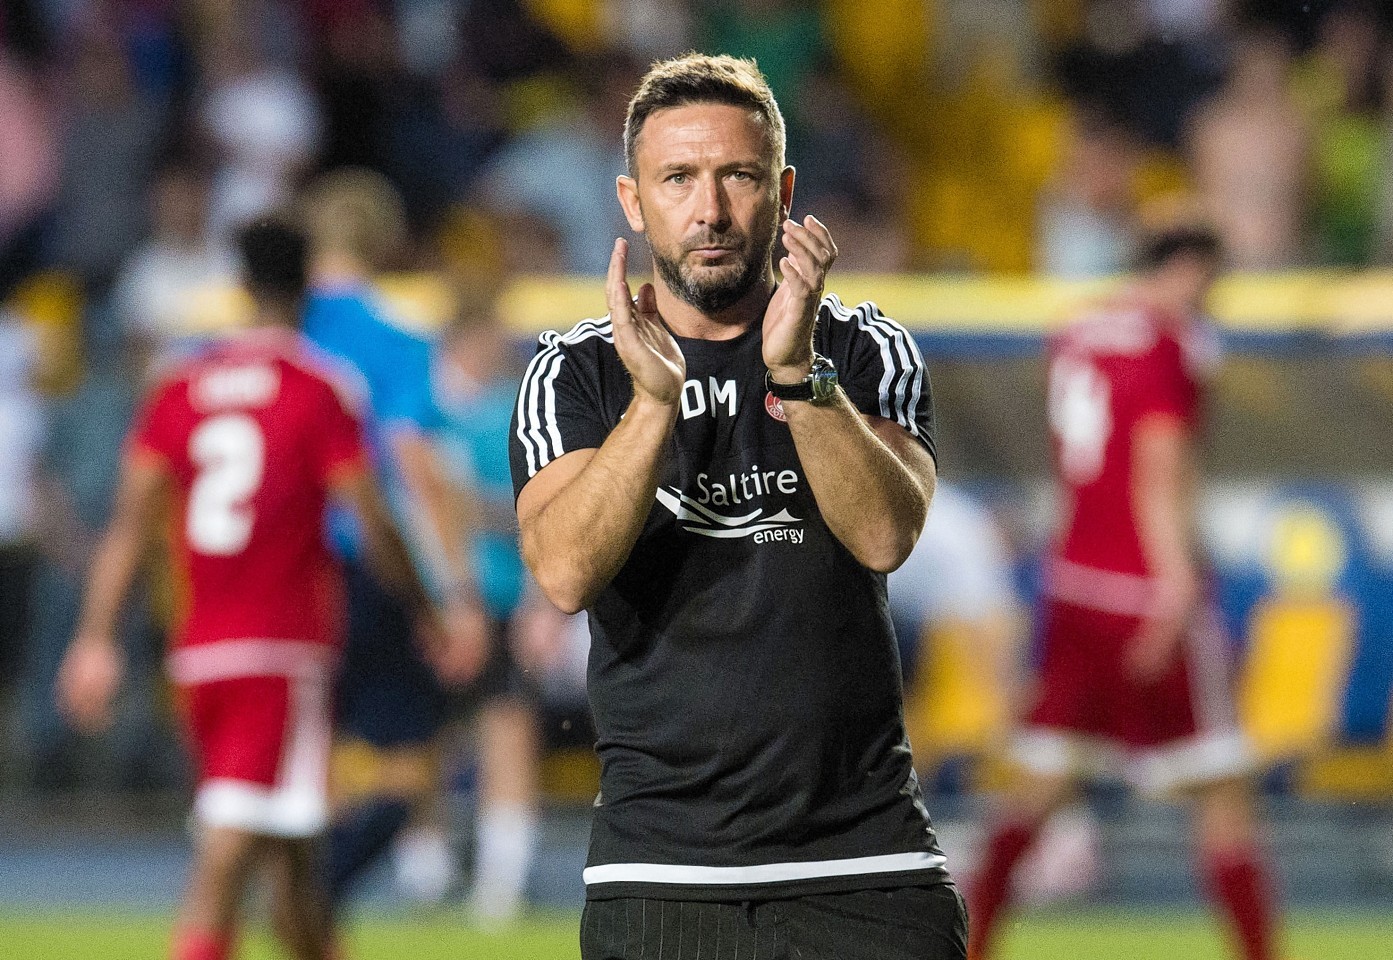 McInnes applauds the travelling Dons fans at full time